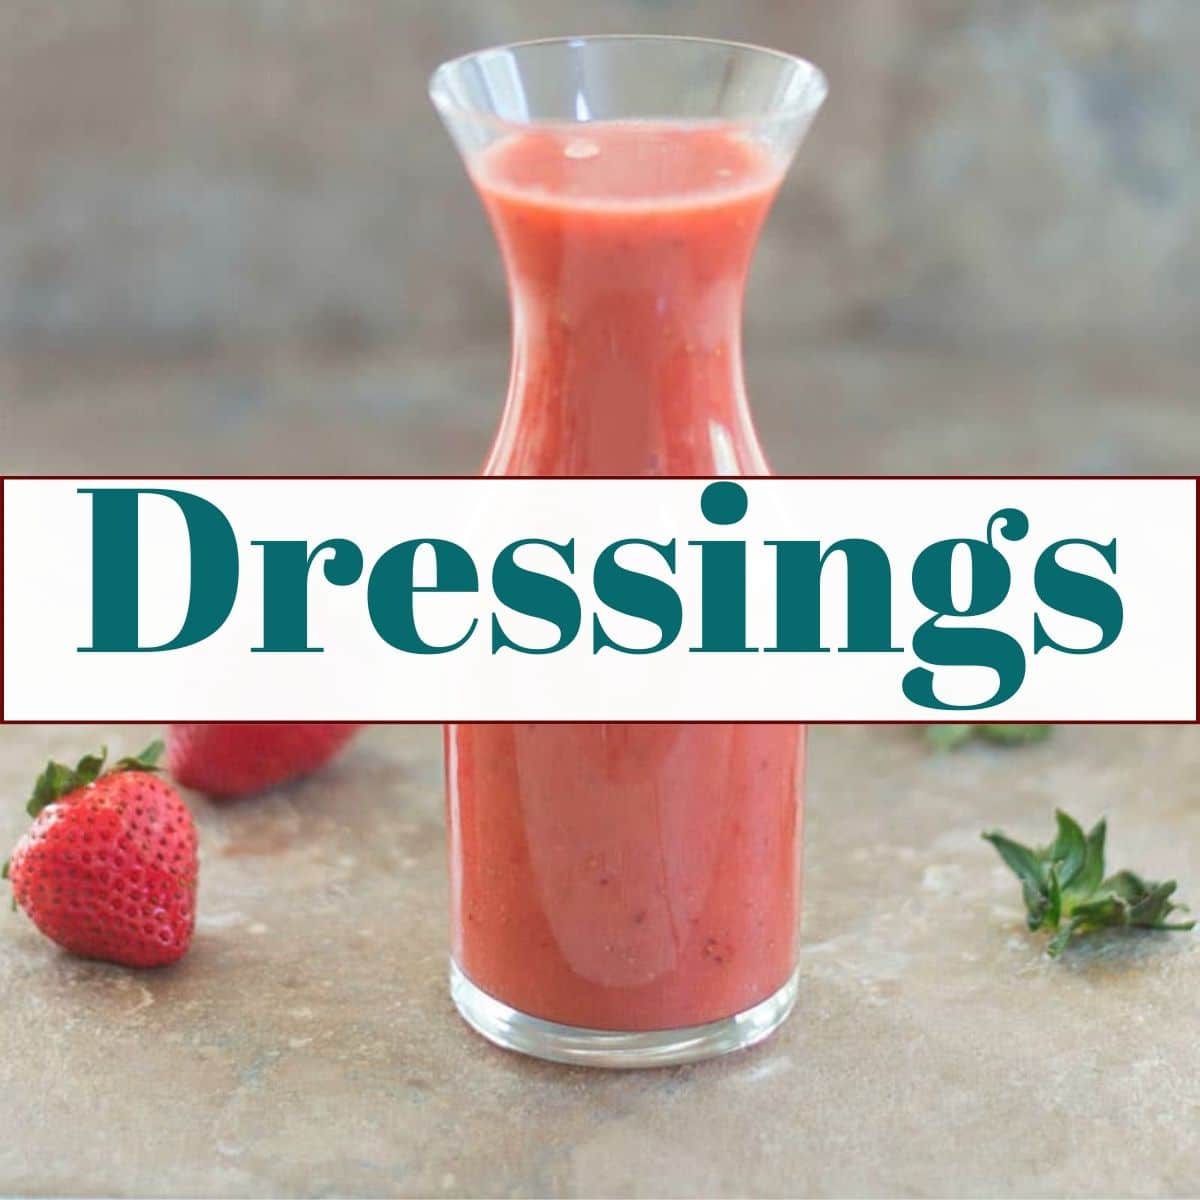 Strawberry Vinaigrette as the backdrop and then, the title of the category is "Dressings"